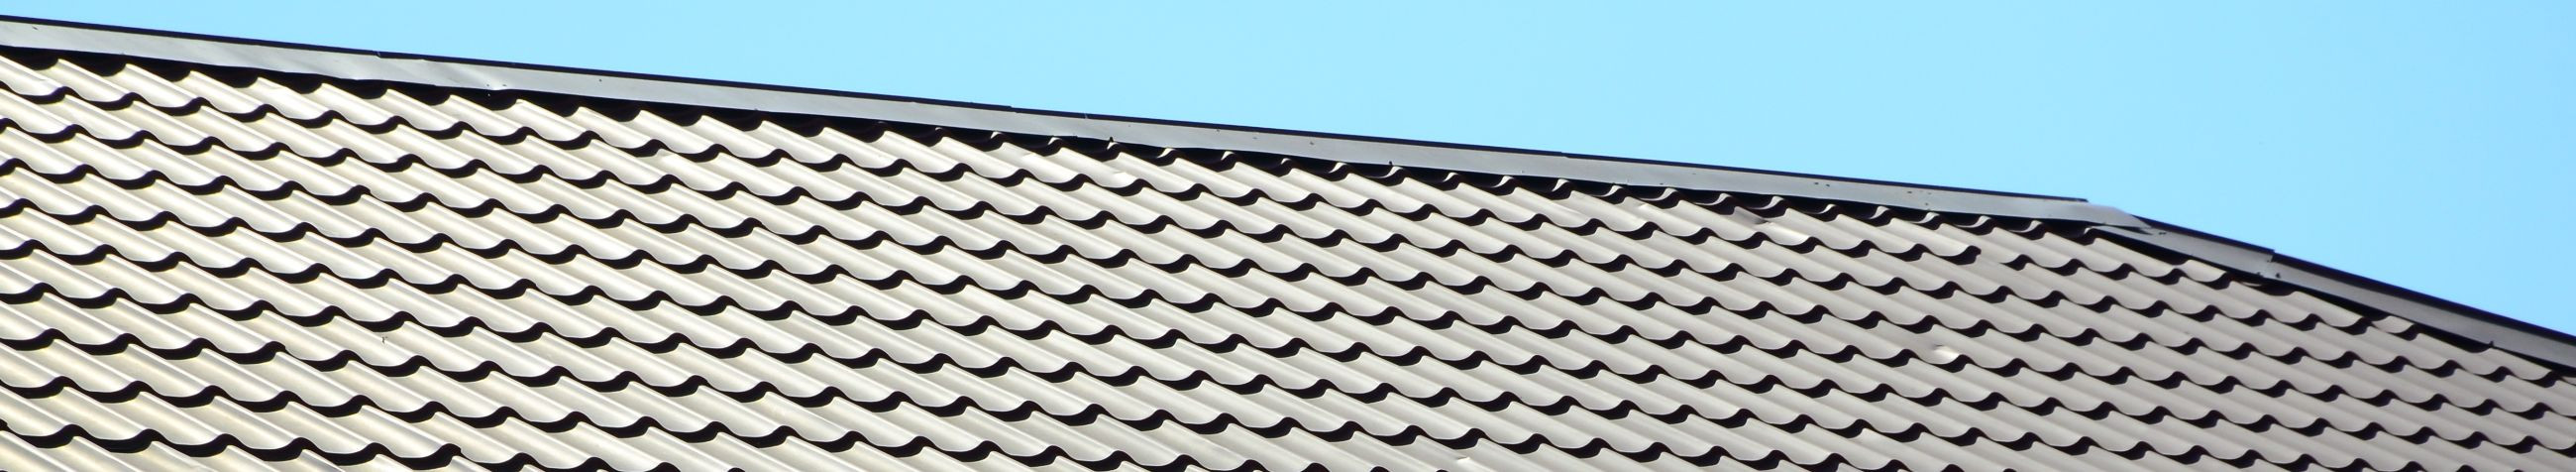 Stainwork, maintenance, Installation work, corrosion protection, control and maintenance, cleaning service, Roofing, roof maintenance, socket stains and design, gutter systems